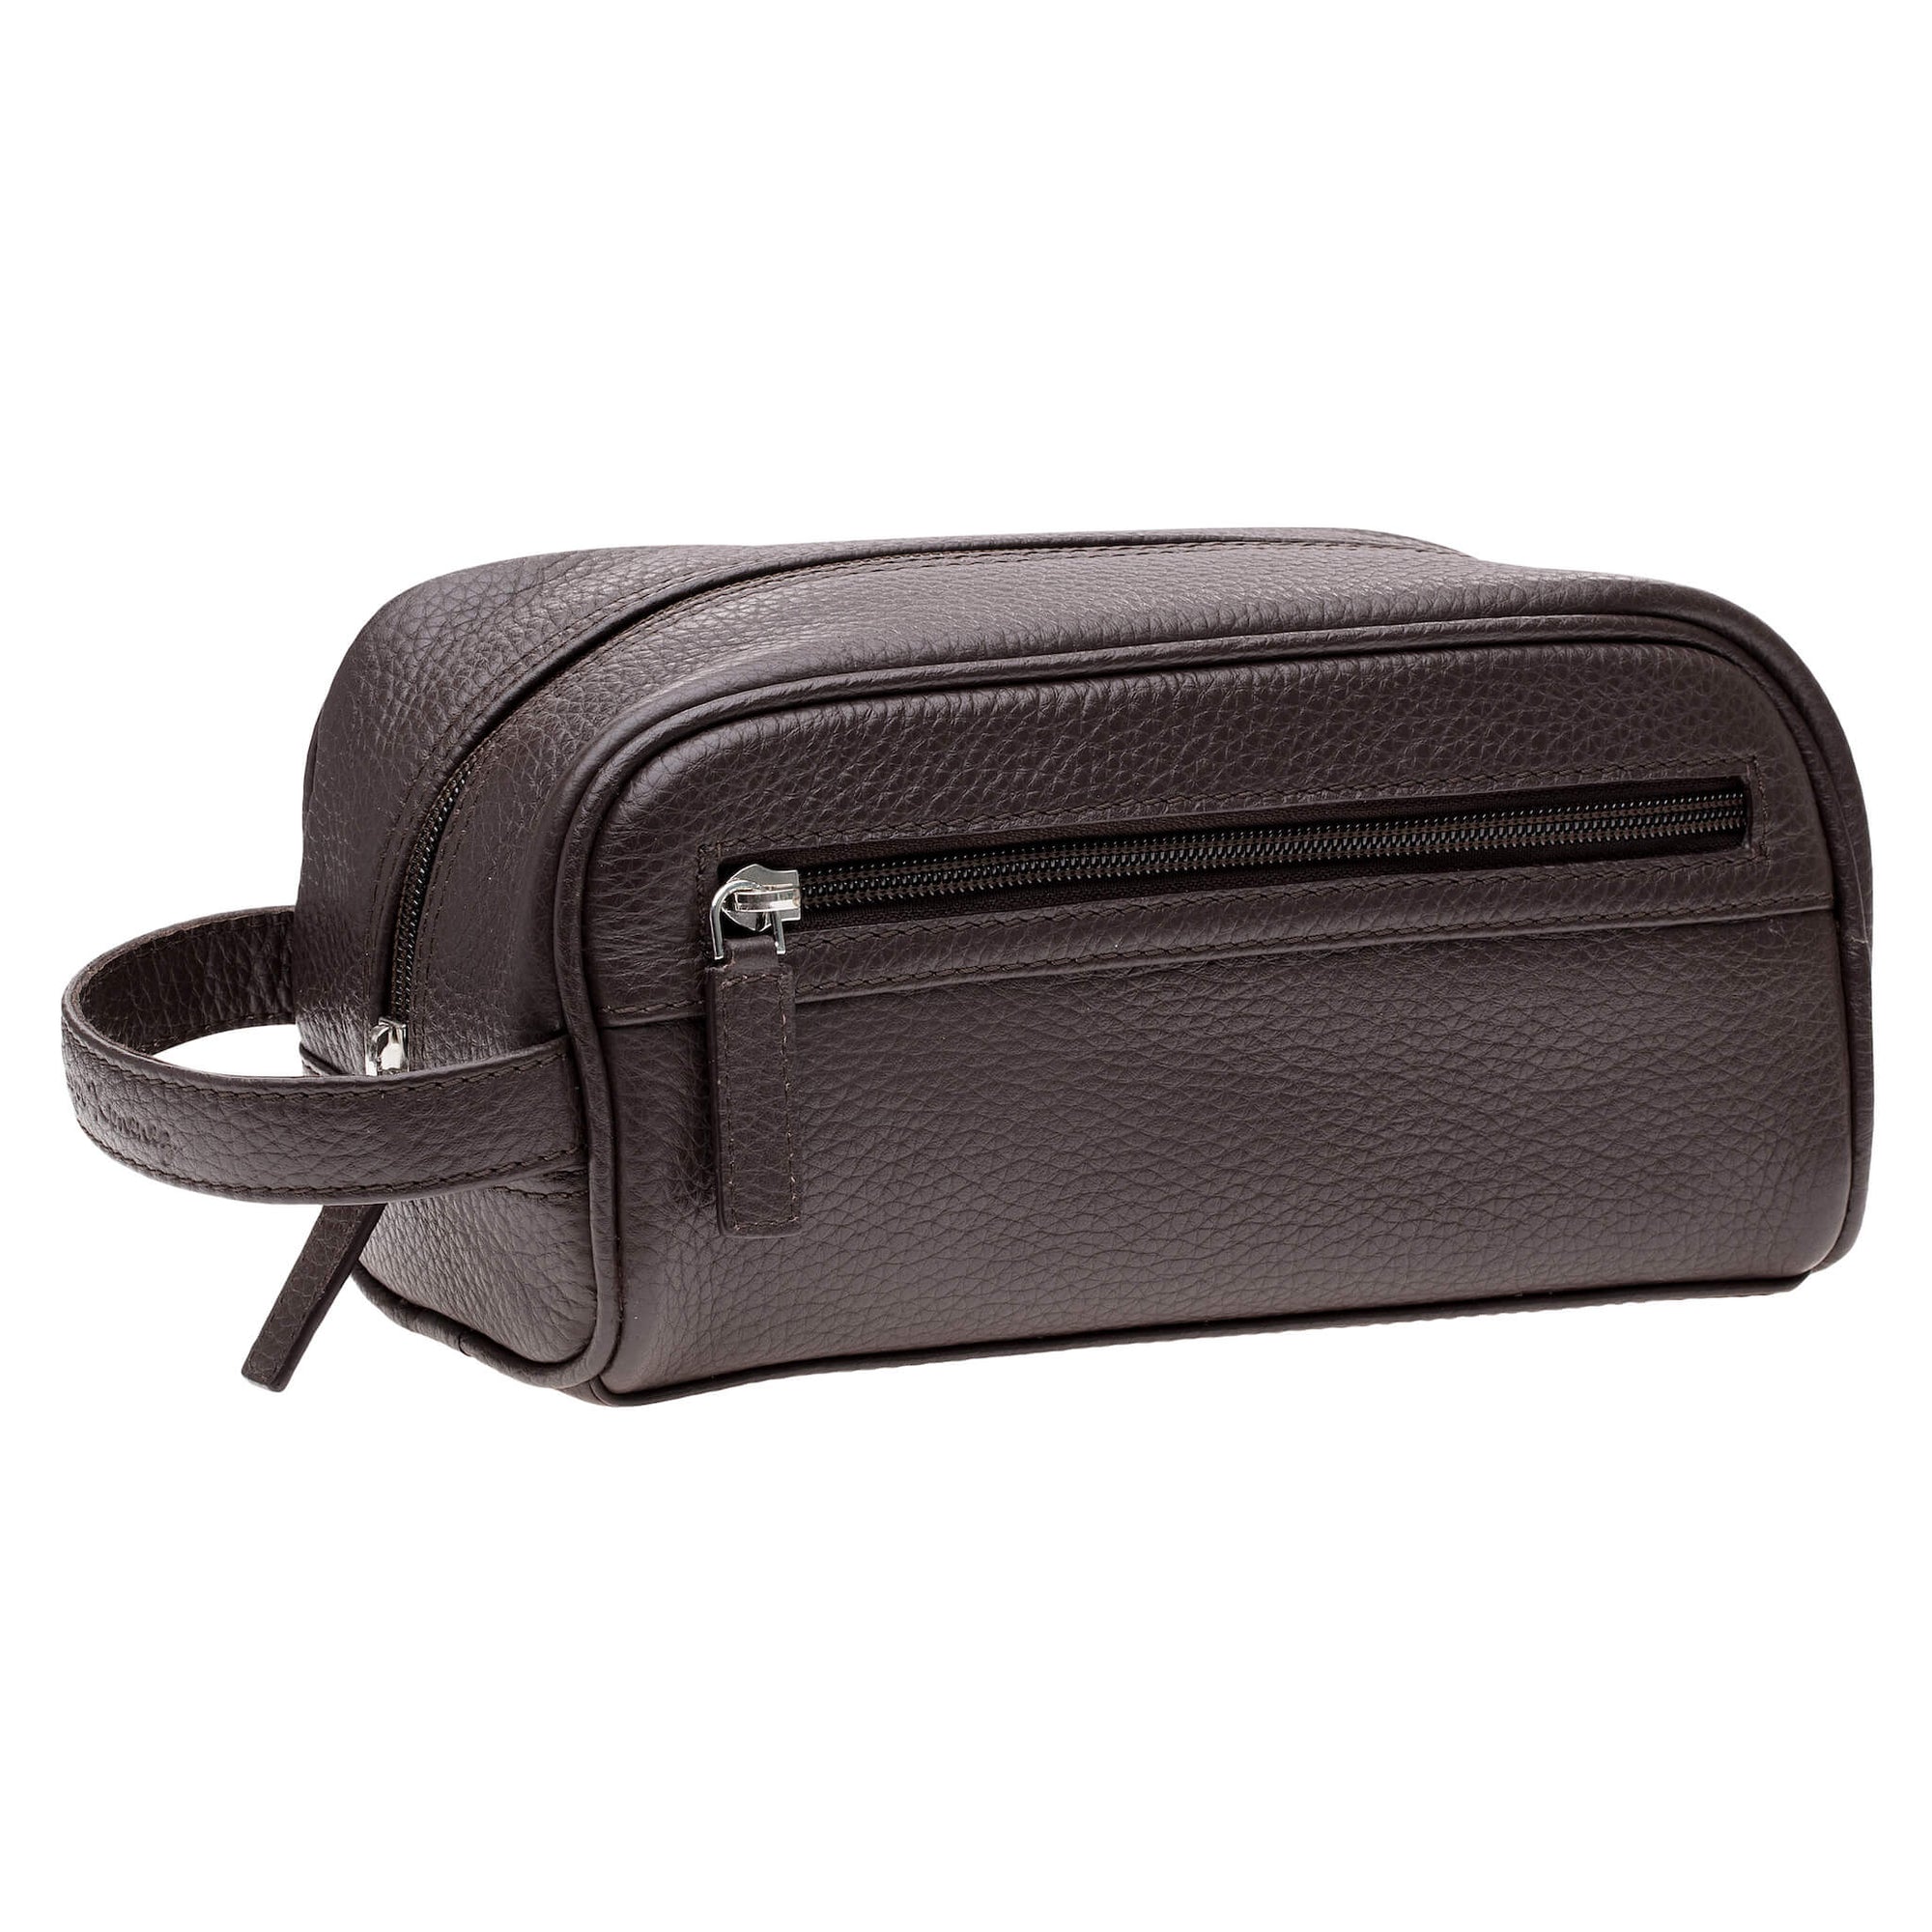 Brown Leather Toiletry Bag - Roger Ximenez: Bespoke Belts and Leather ...